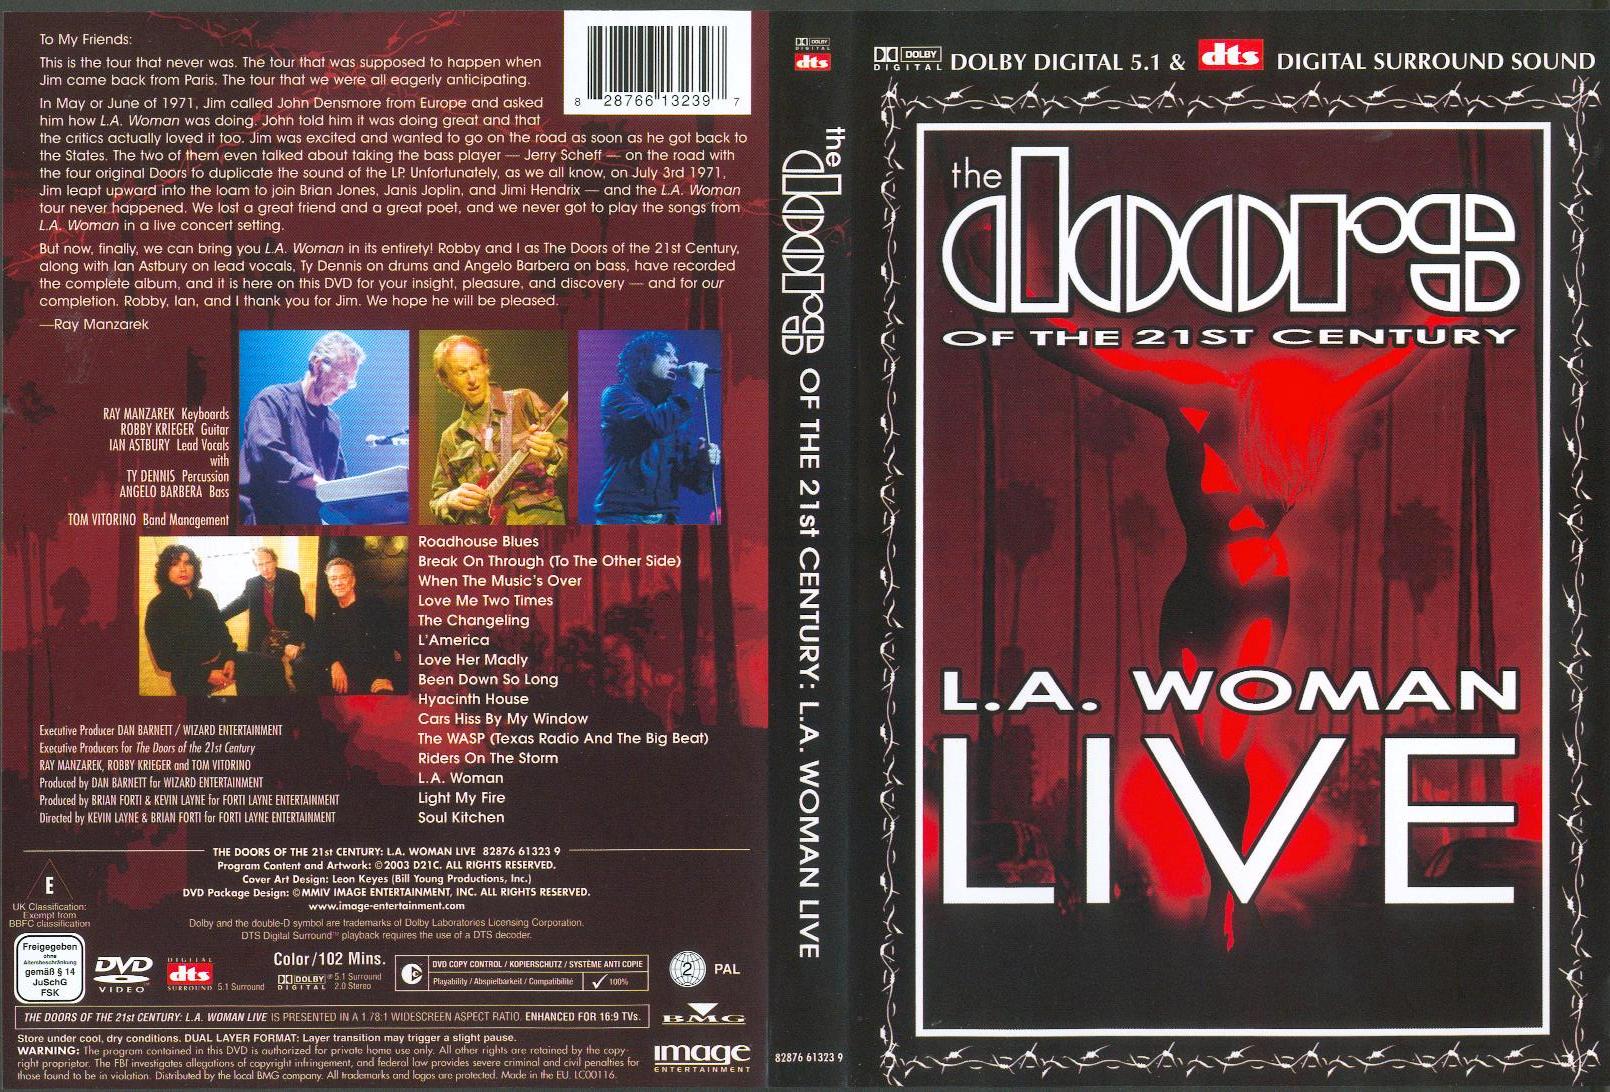 Jaquette DVD The Doors of the 21st century L A Woman Live